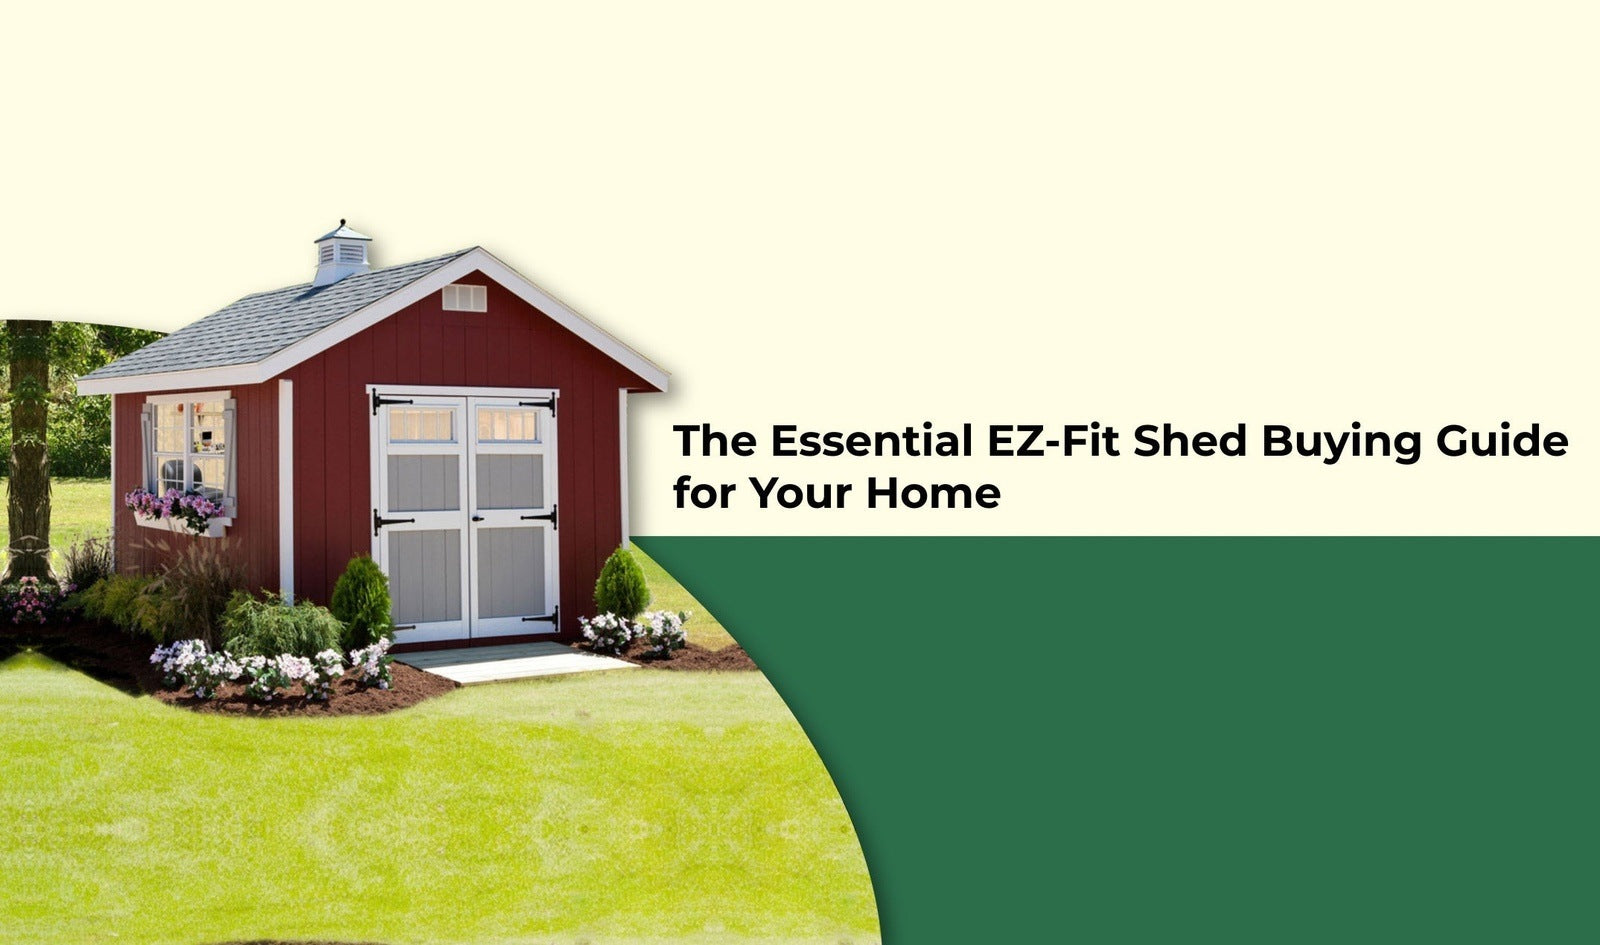 The Ultimate Guide to Choosing the Right EZ-Fit Shed for Your Home